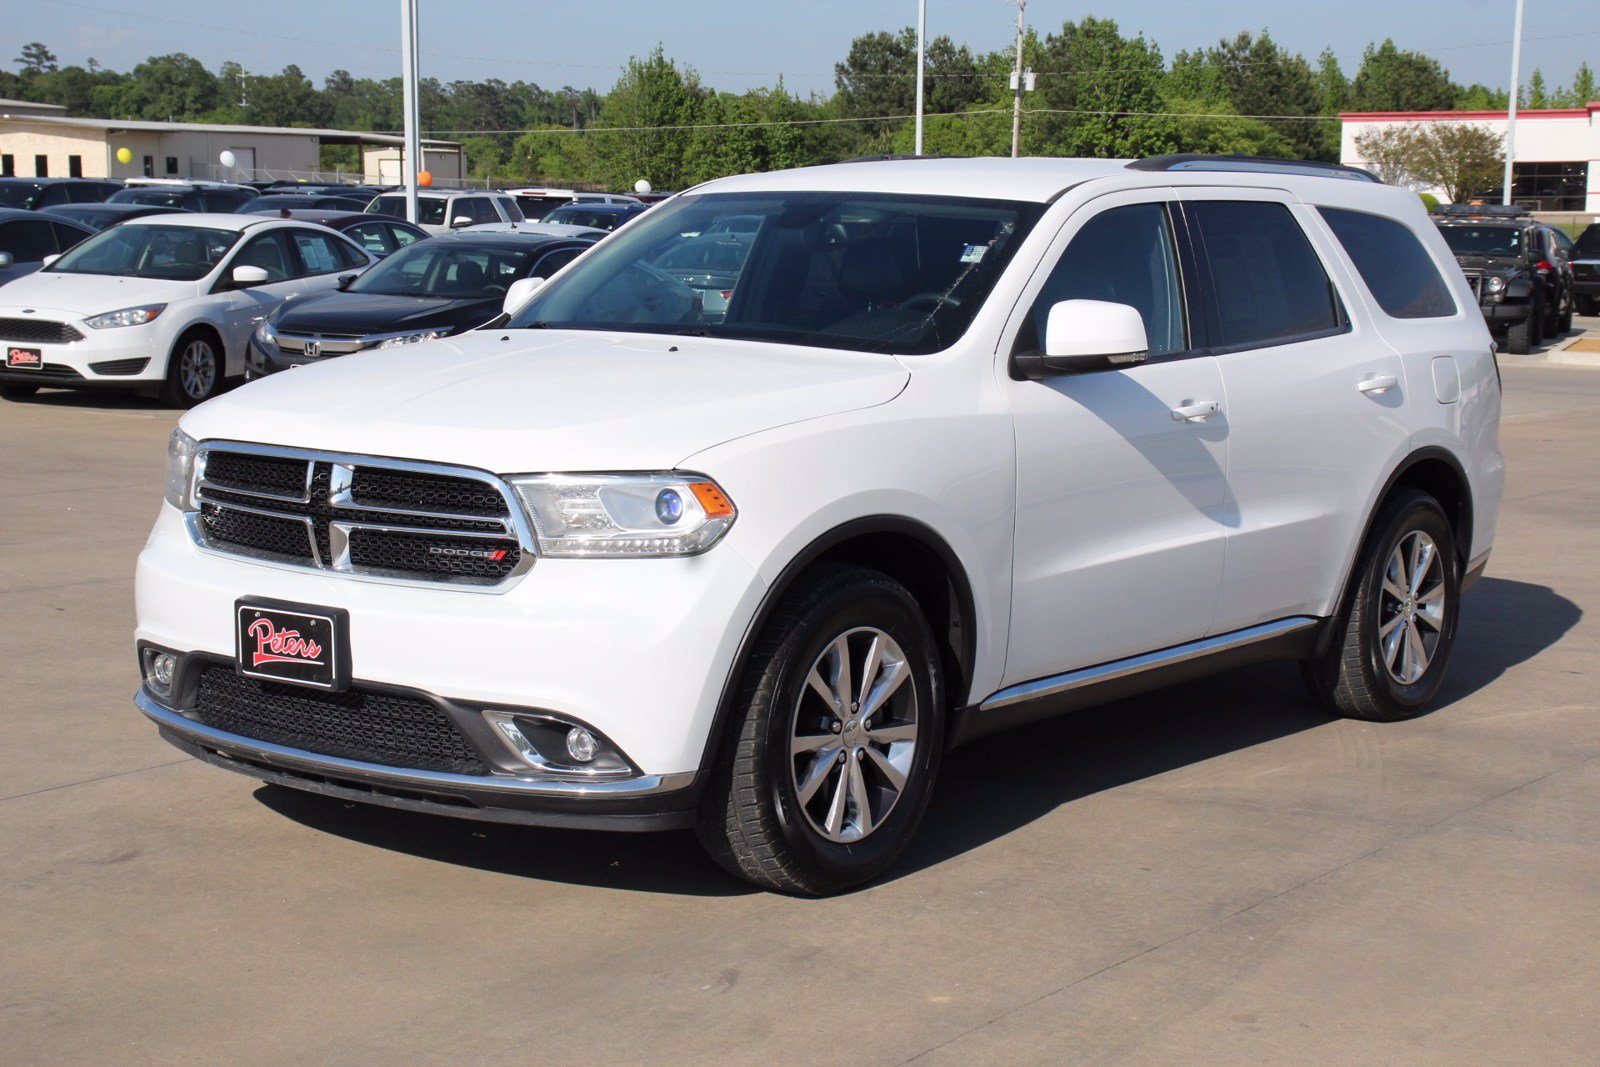 PreOwned 2016 Dodge Durango Limited SUV in Longview